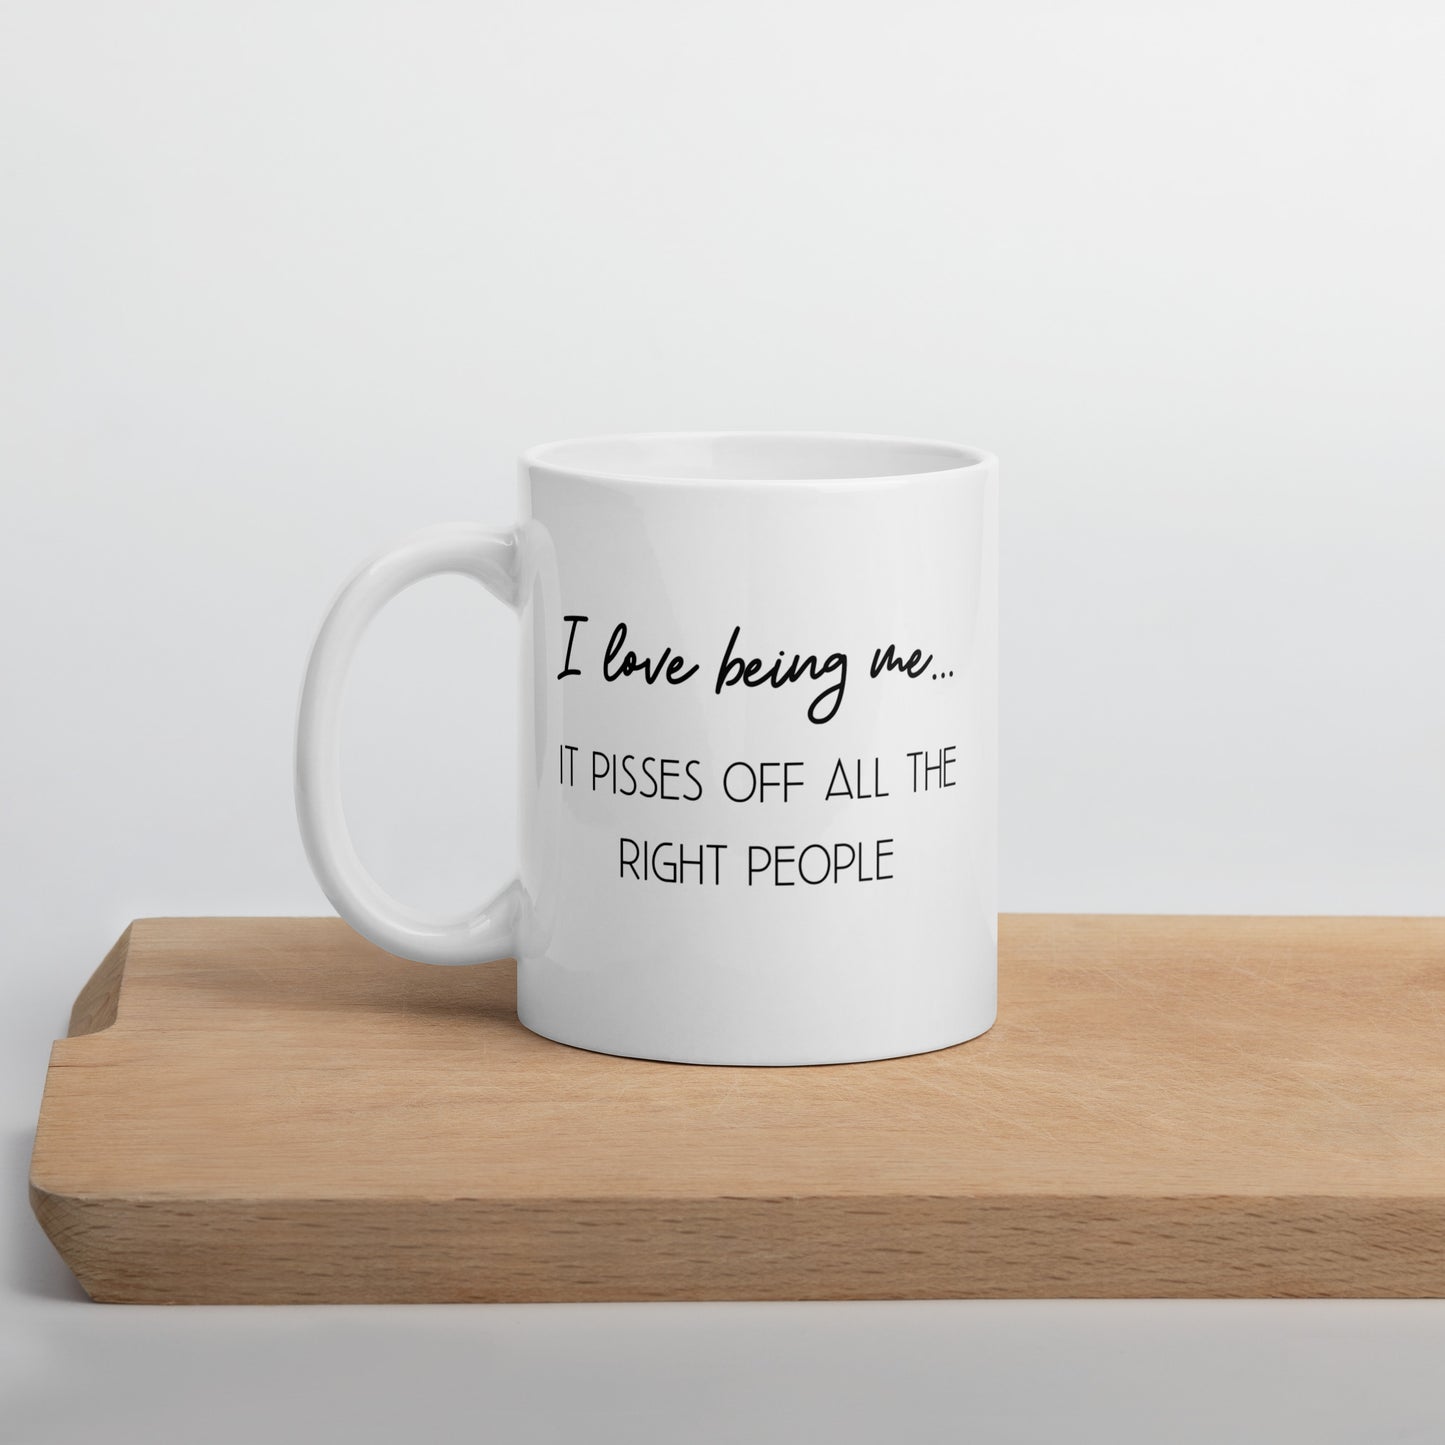 I Love Being Me, It Pisses Off All The Right People White Ceramic Coffee Mug